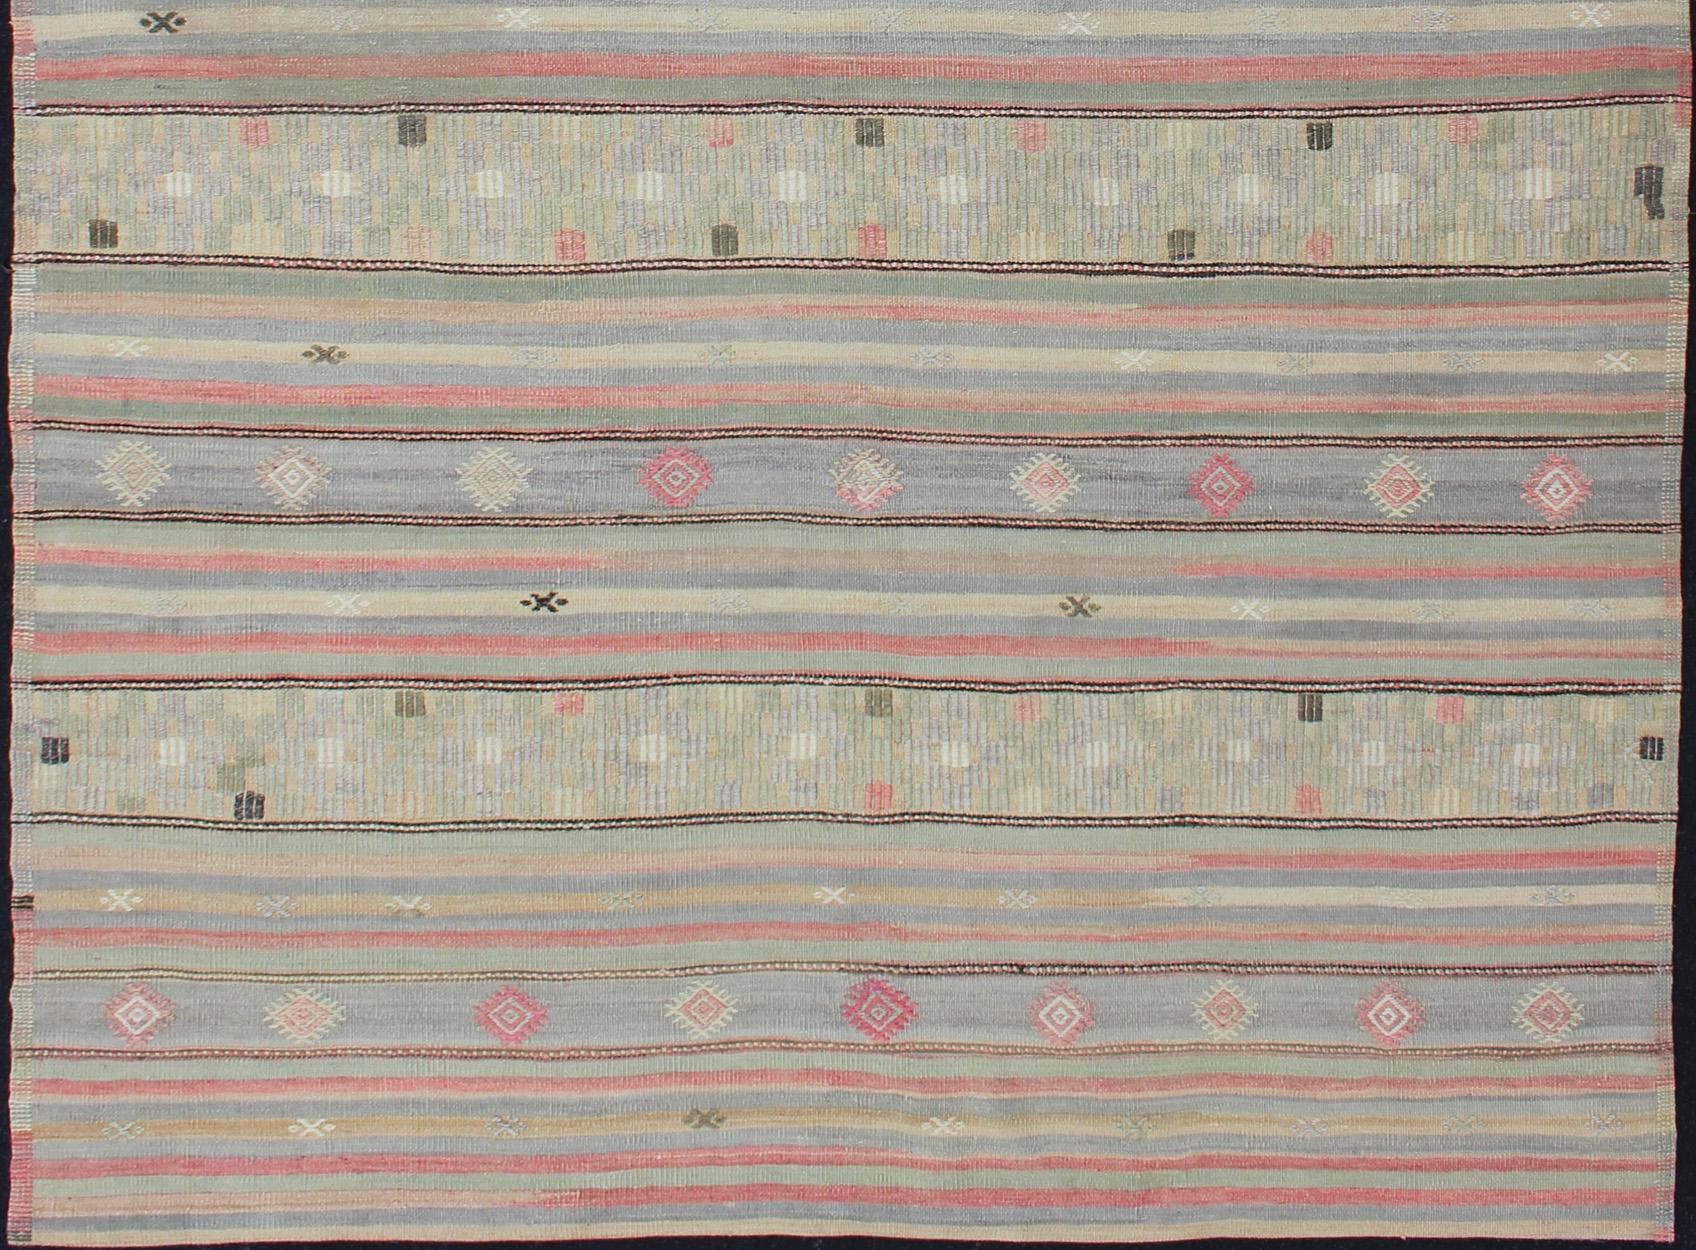 Horizontal stripe design flat-weave Kilim from Turkey vintage in pink, light blue, brown, and cream, rug EN-176549, country of origin / type: Turkey / Kilim, circa 1950.

Woven during the mid-20th century in Turkey, this fairly large vintage